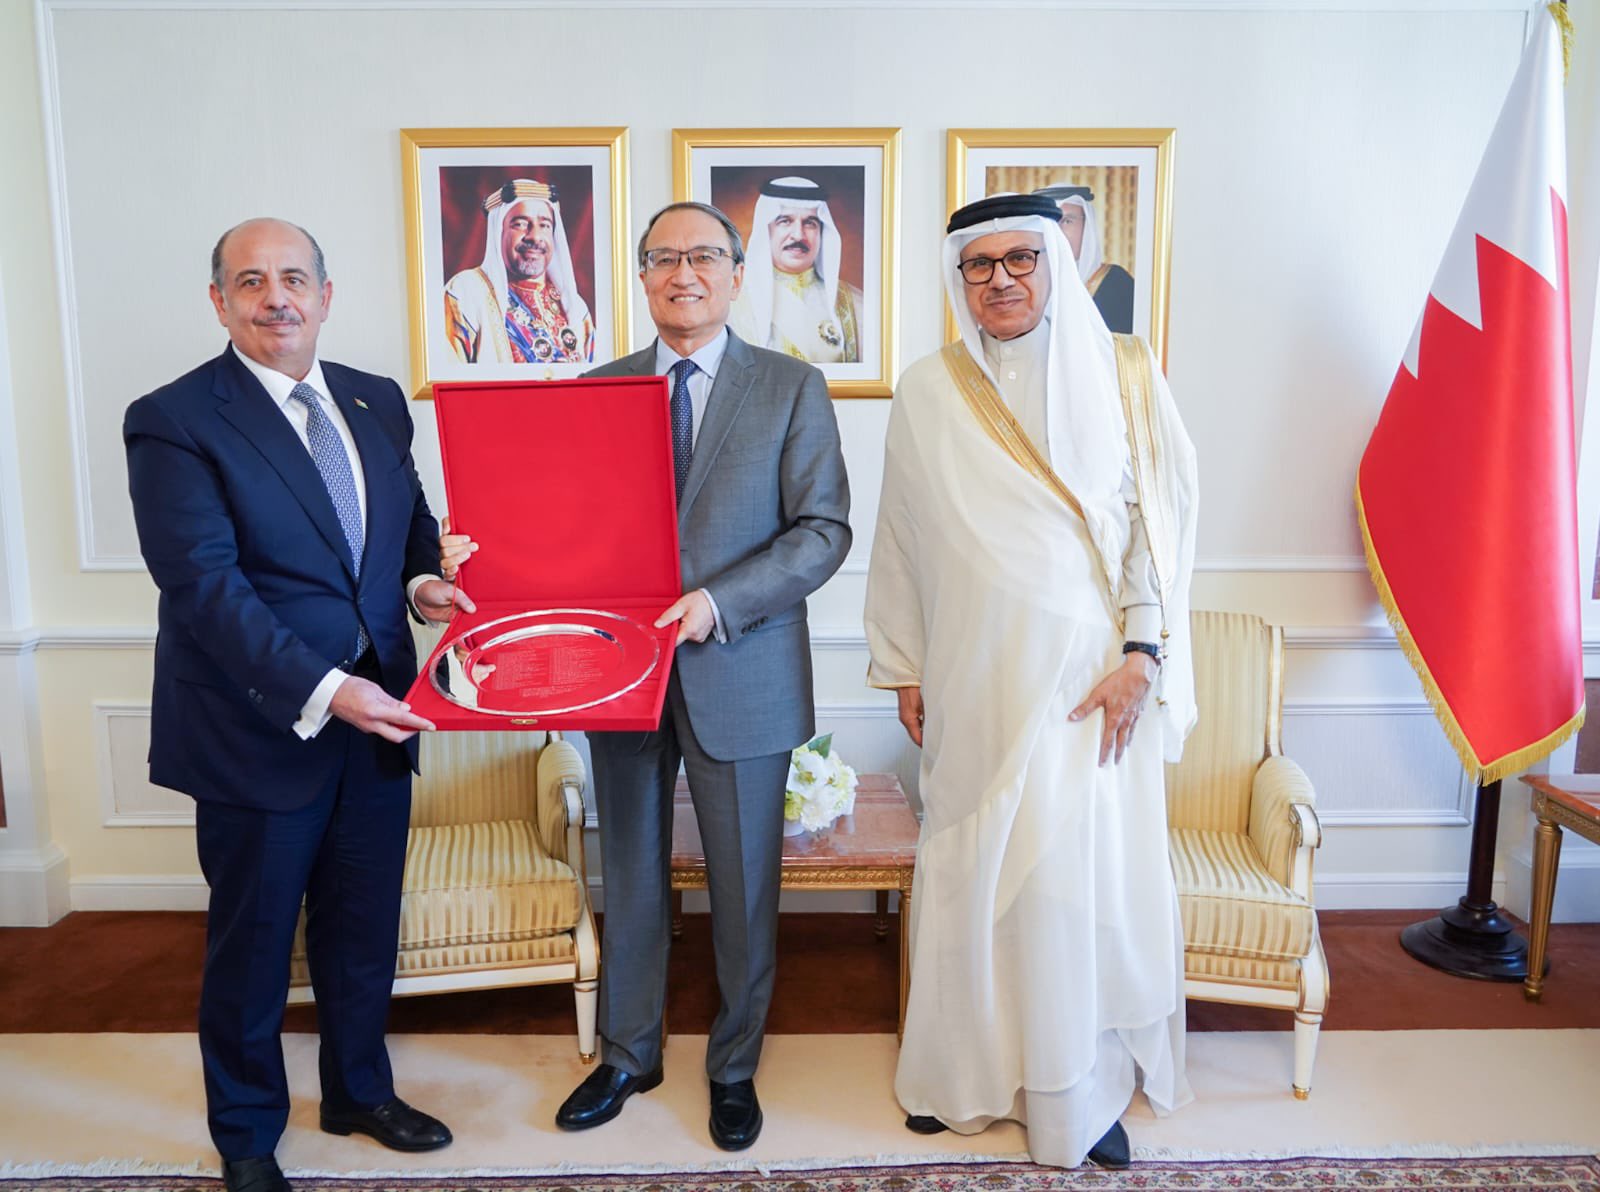 Chinese Ambassador to Bahrain, Anwar Habibullah, was welcomed by the Minister of Foreign Affairs, Dr. Abdullatif bin Rashid Al Zayani, at the Ministry’s main offices.